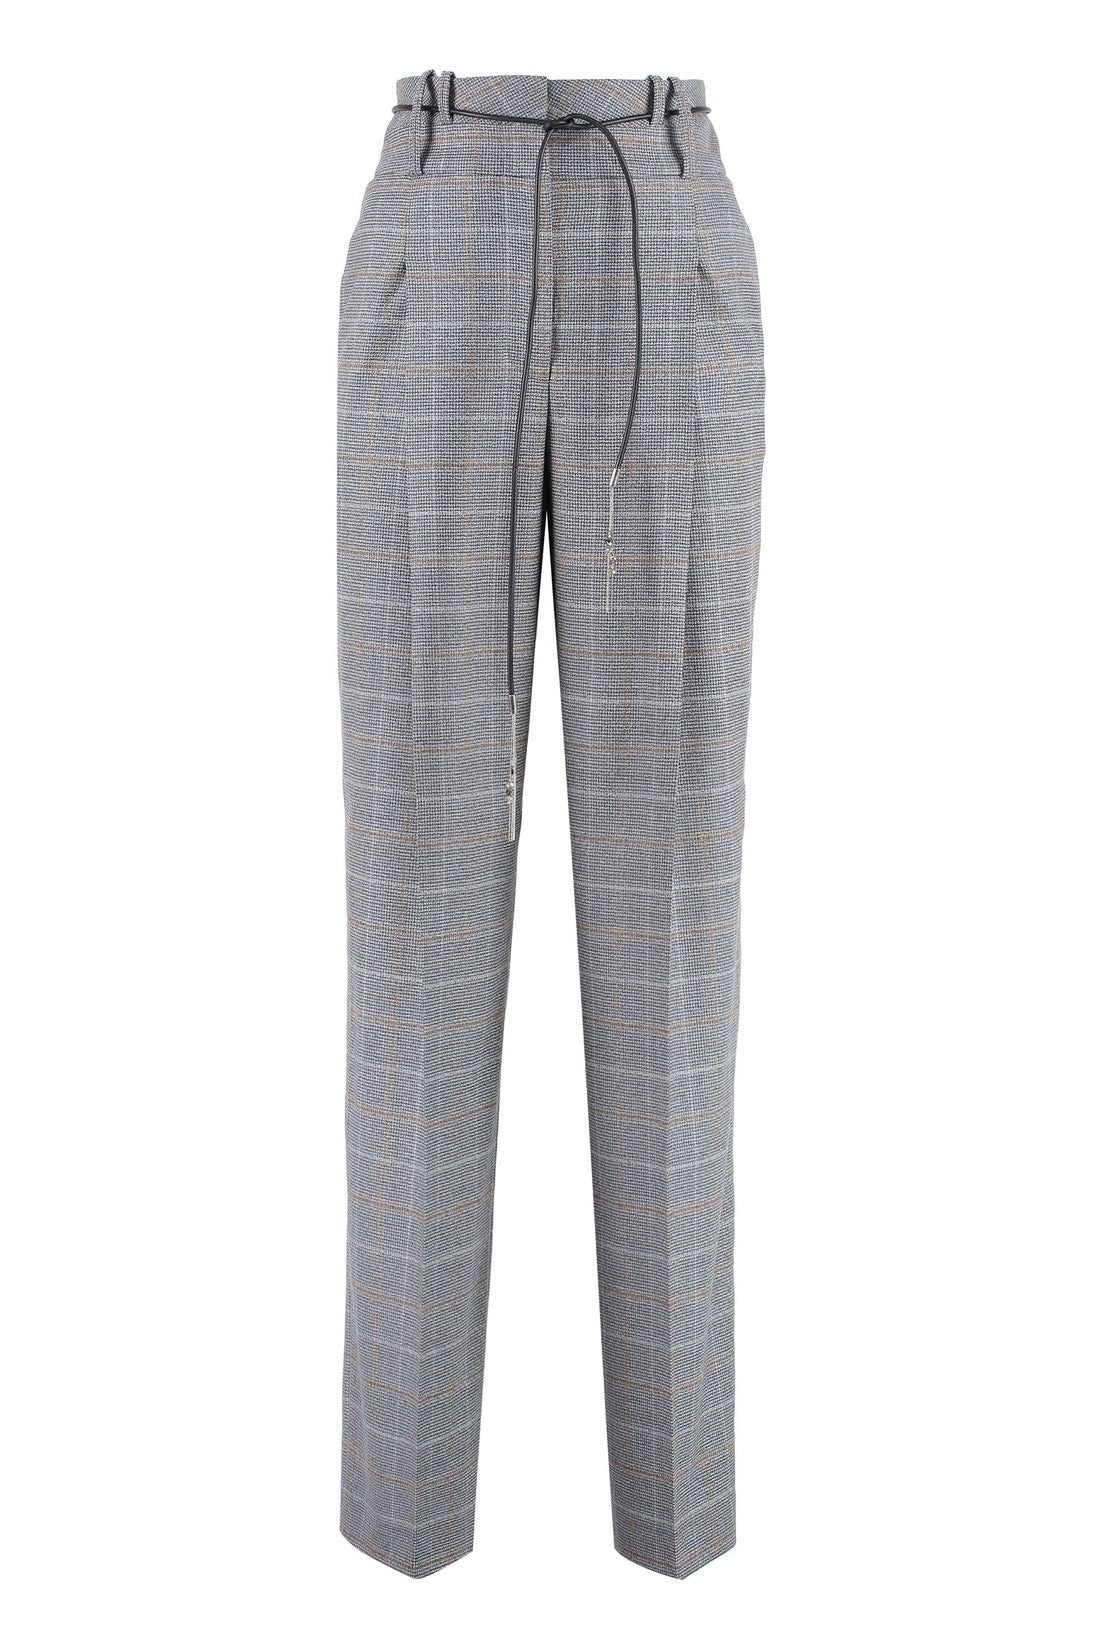 Peserico-OUTLET-SALE-Prince of Wales checked wool trousers-ARCHIVIST